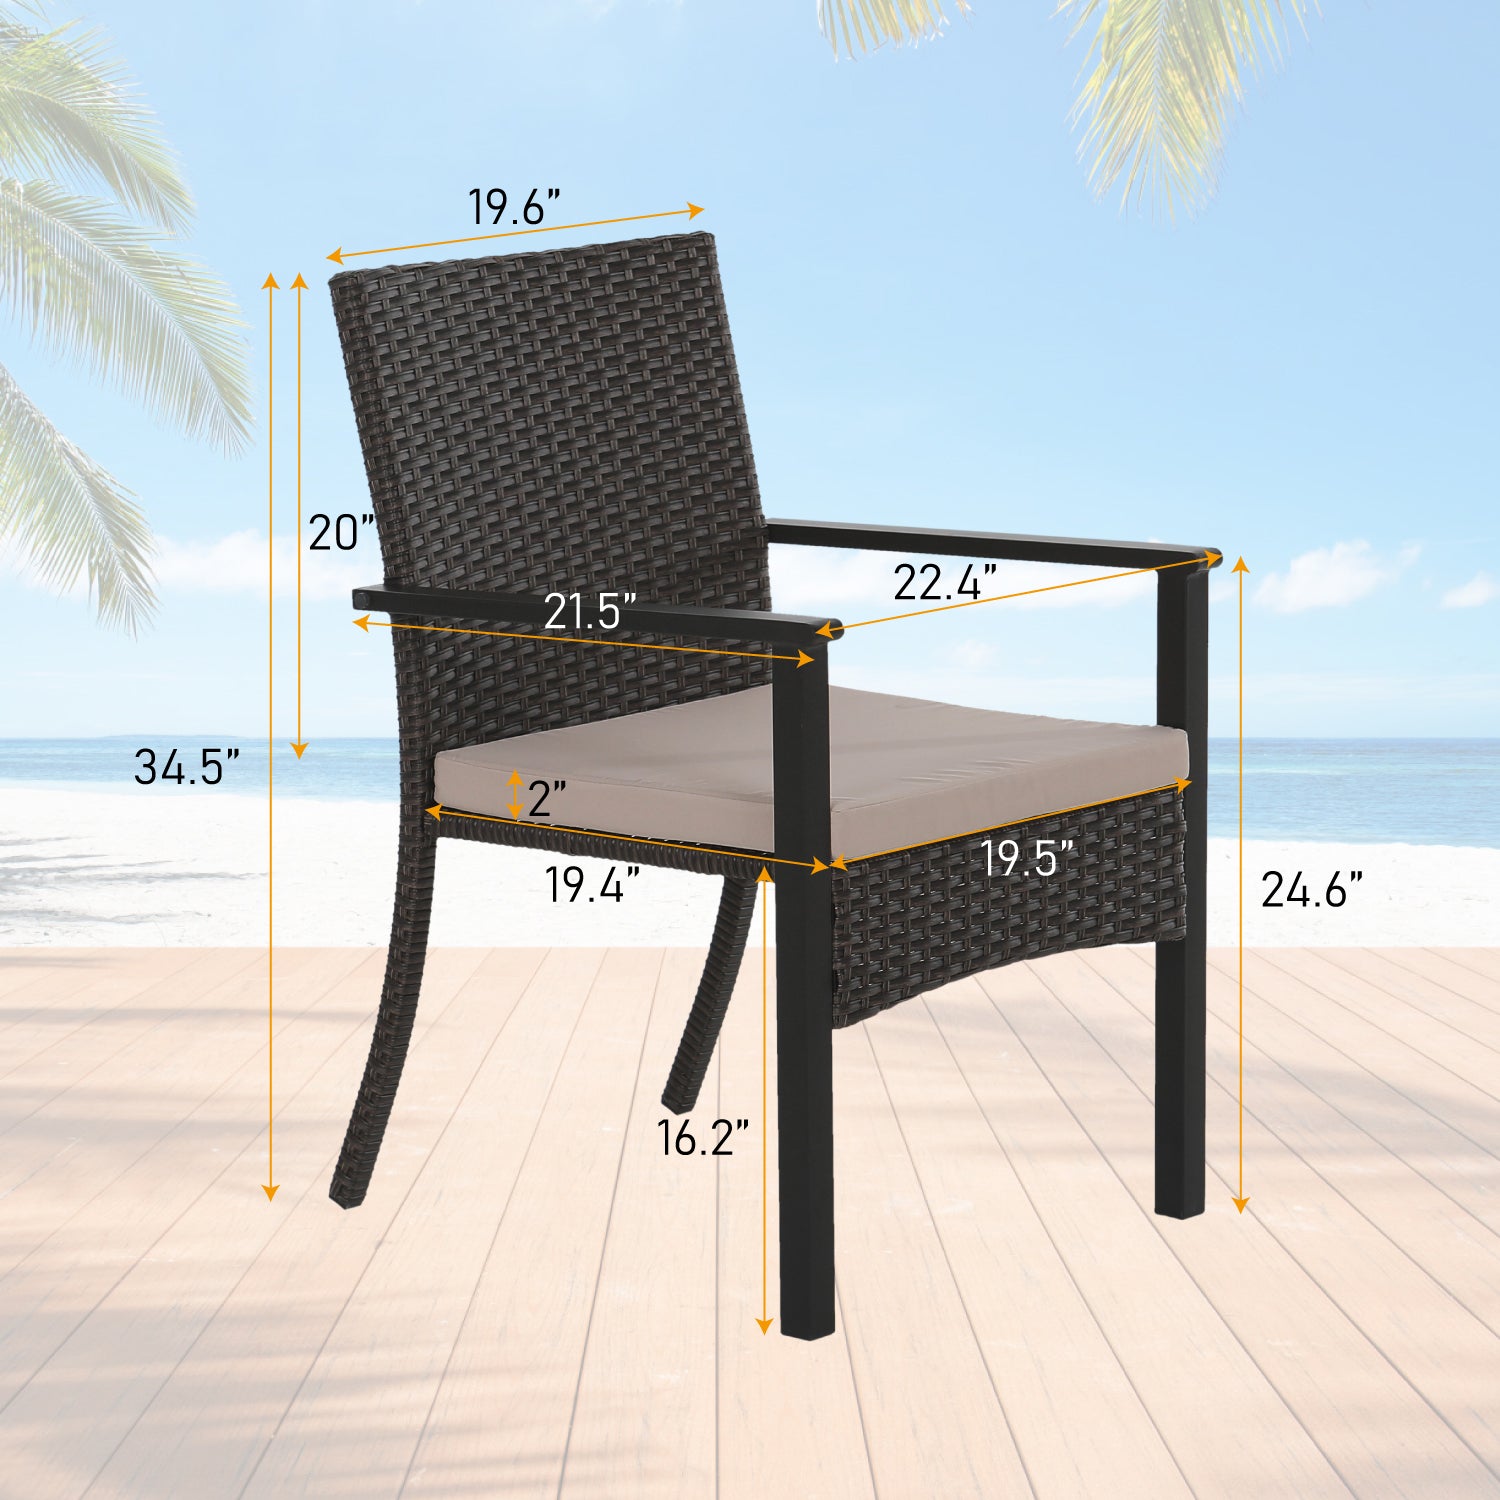 MFSTUDIO 9-Piece Patio Dining Set Extra Large Square Table & Beige-cushion Rattan Fixed Chairs